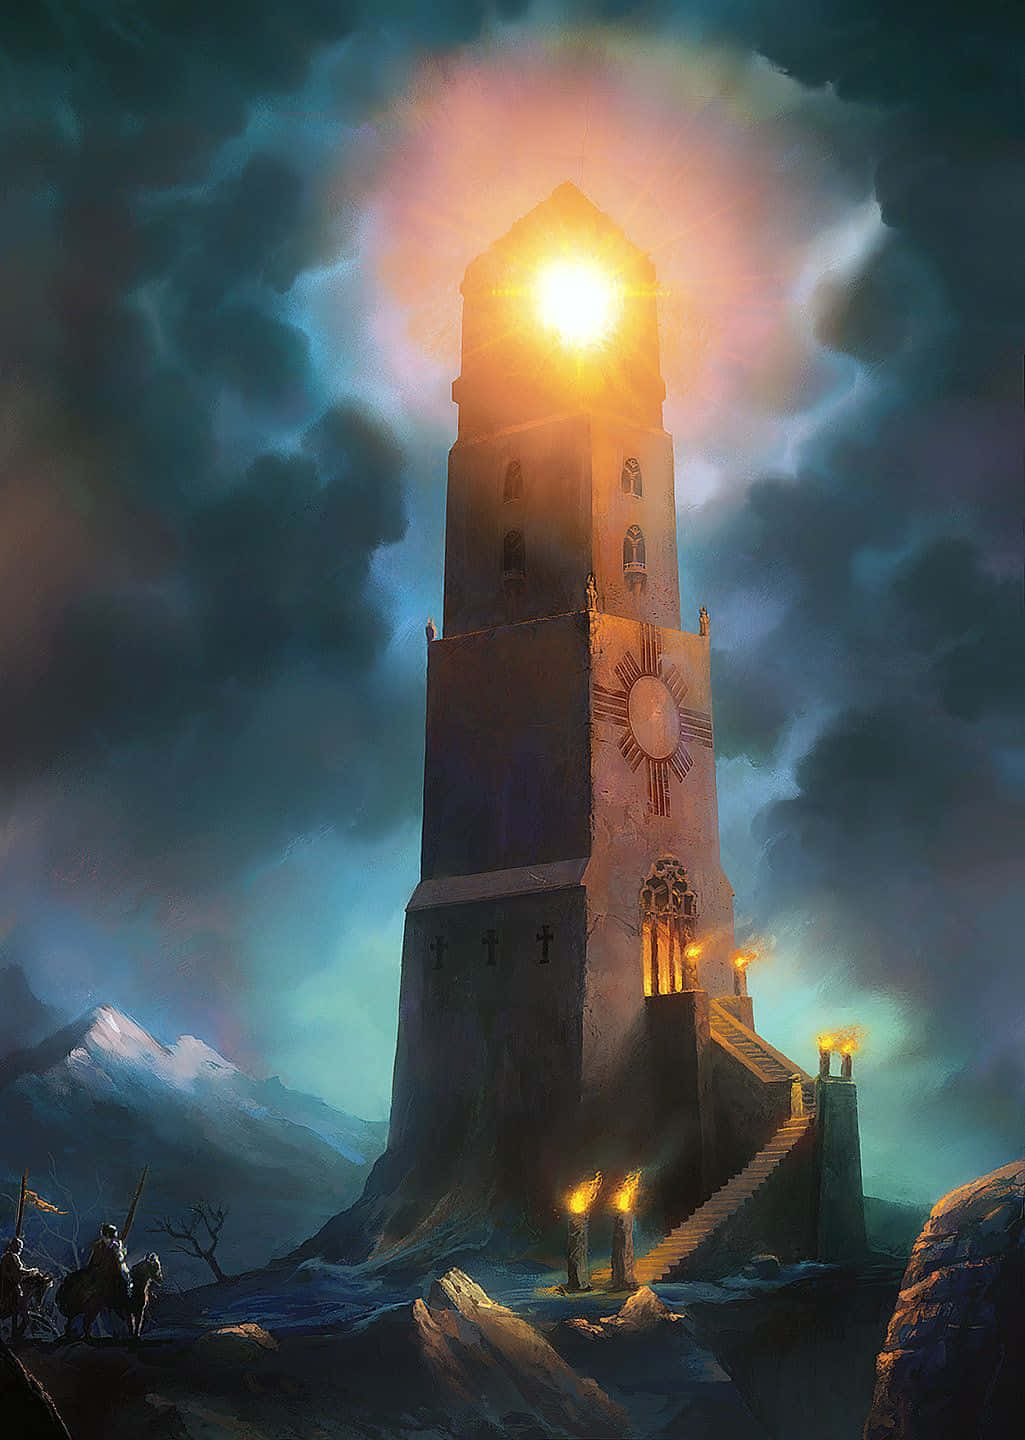 A Painting Of A Tower With A Light Shining On It